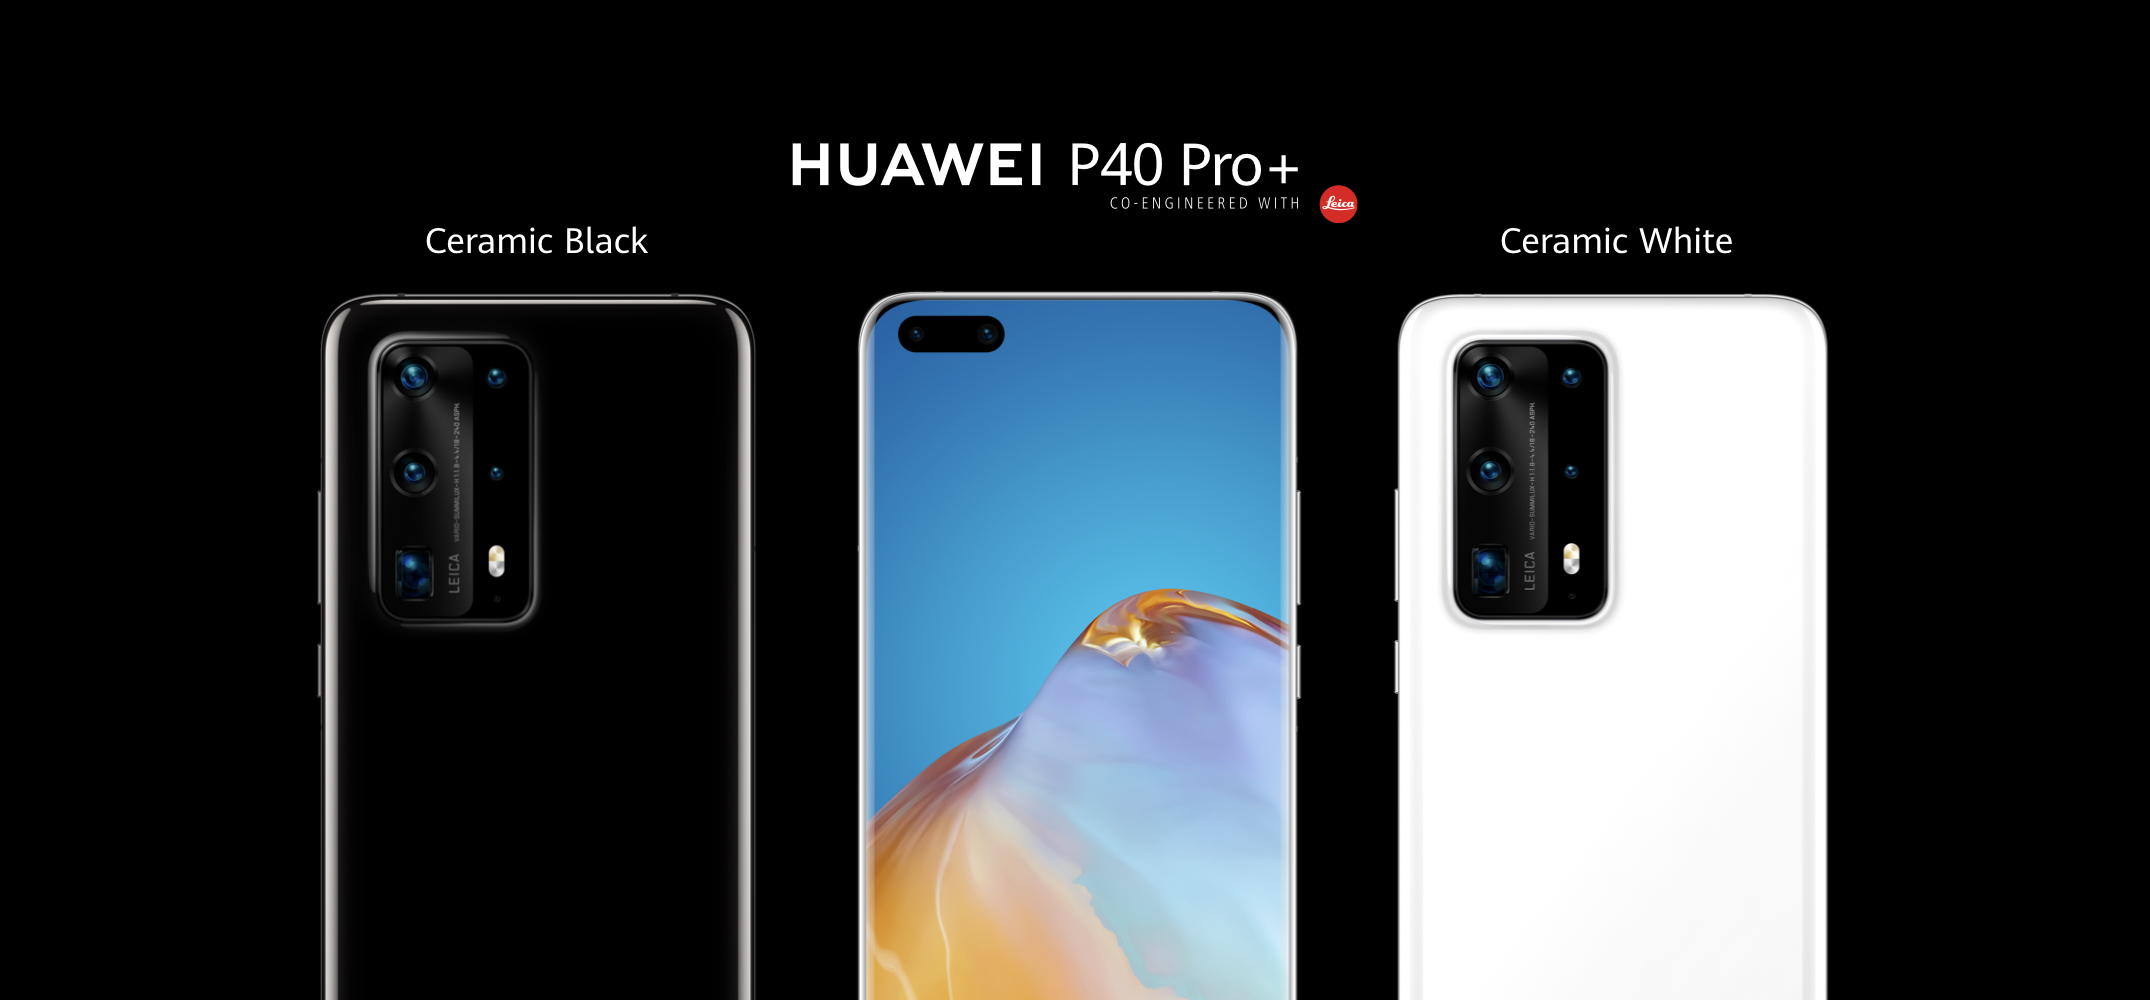 HUAWEI P40 Pro+ Coming on June 26